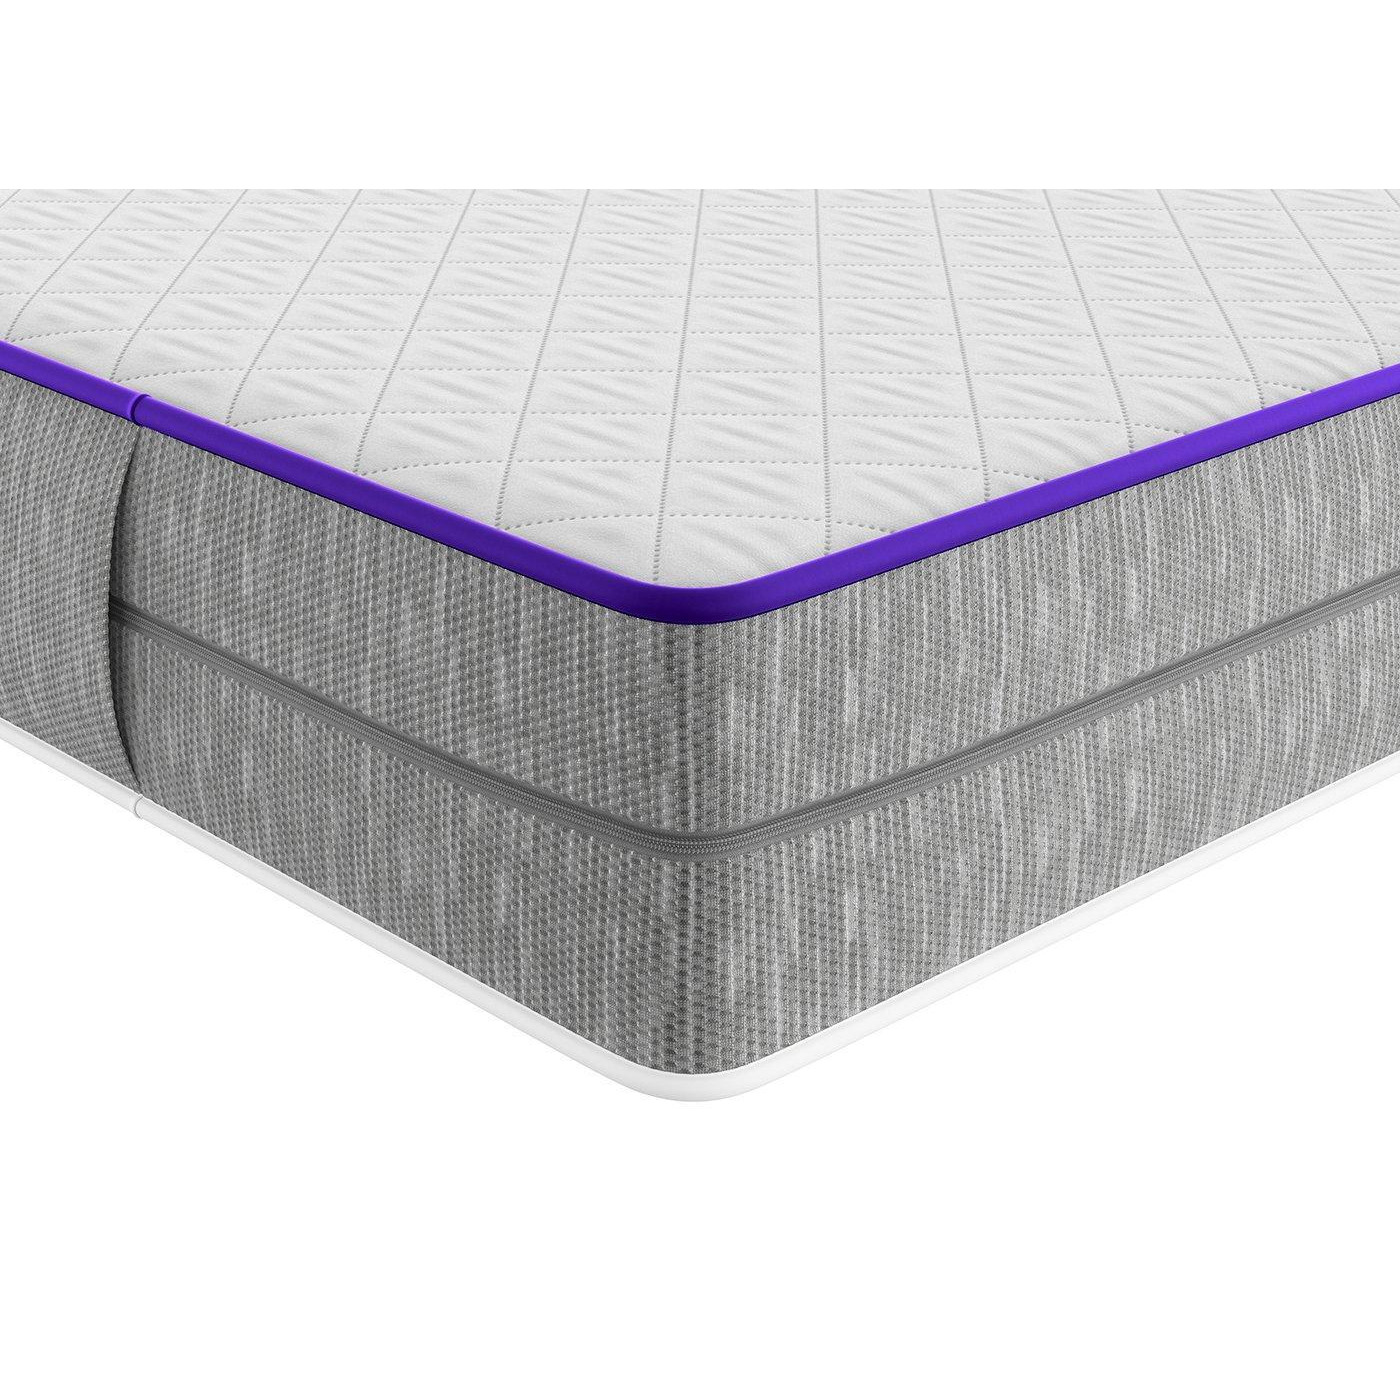 Over The Moon Traditional Spring Mattress - 3'0 Single